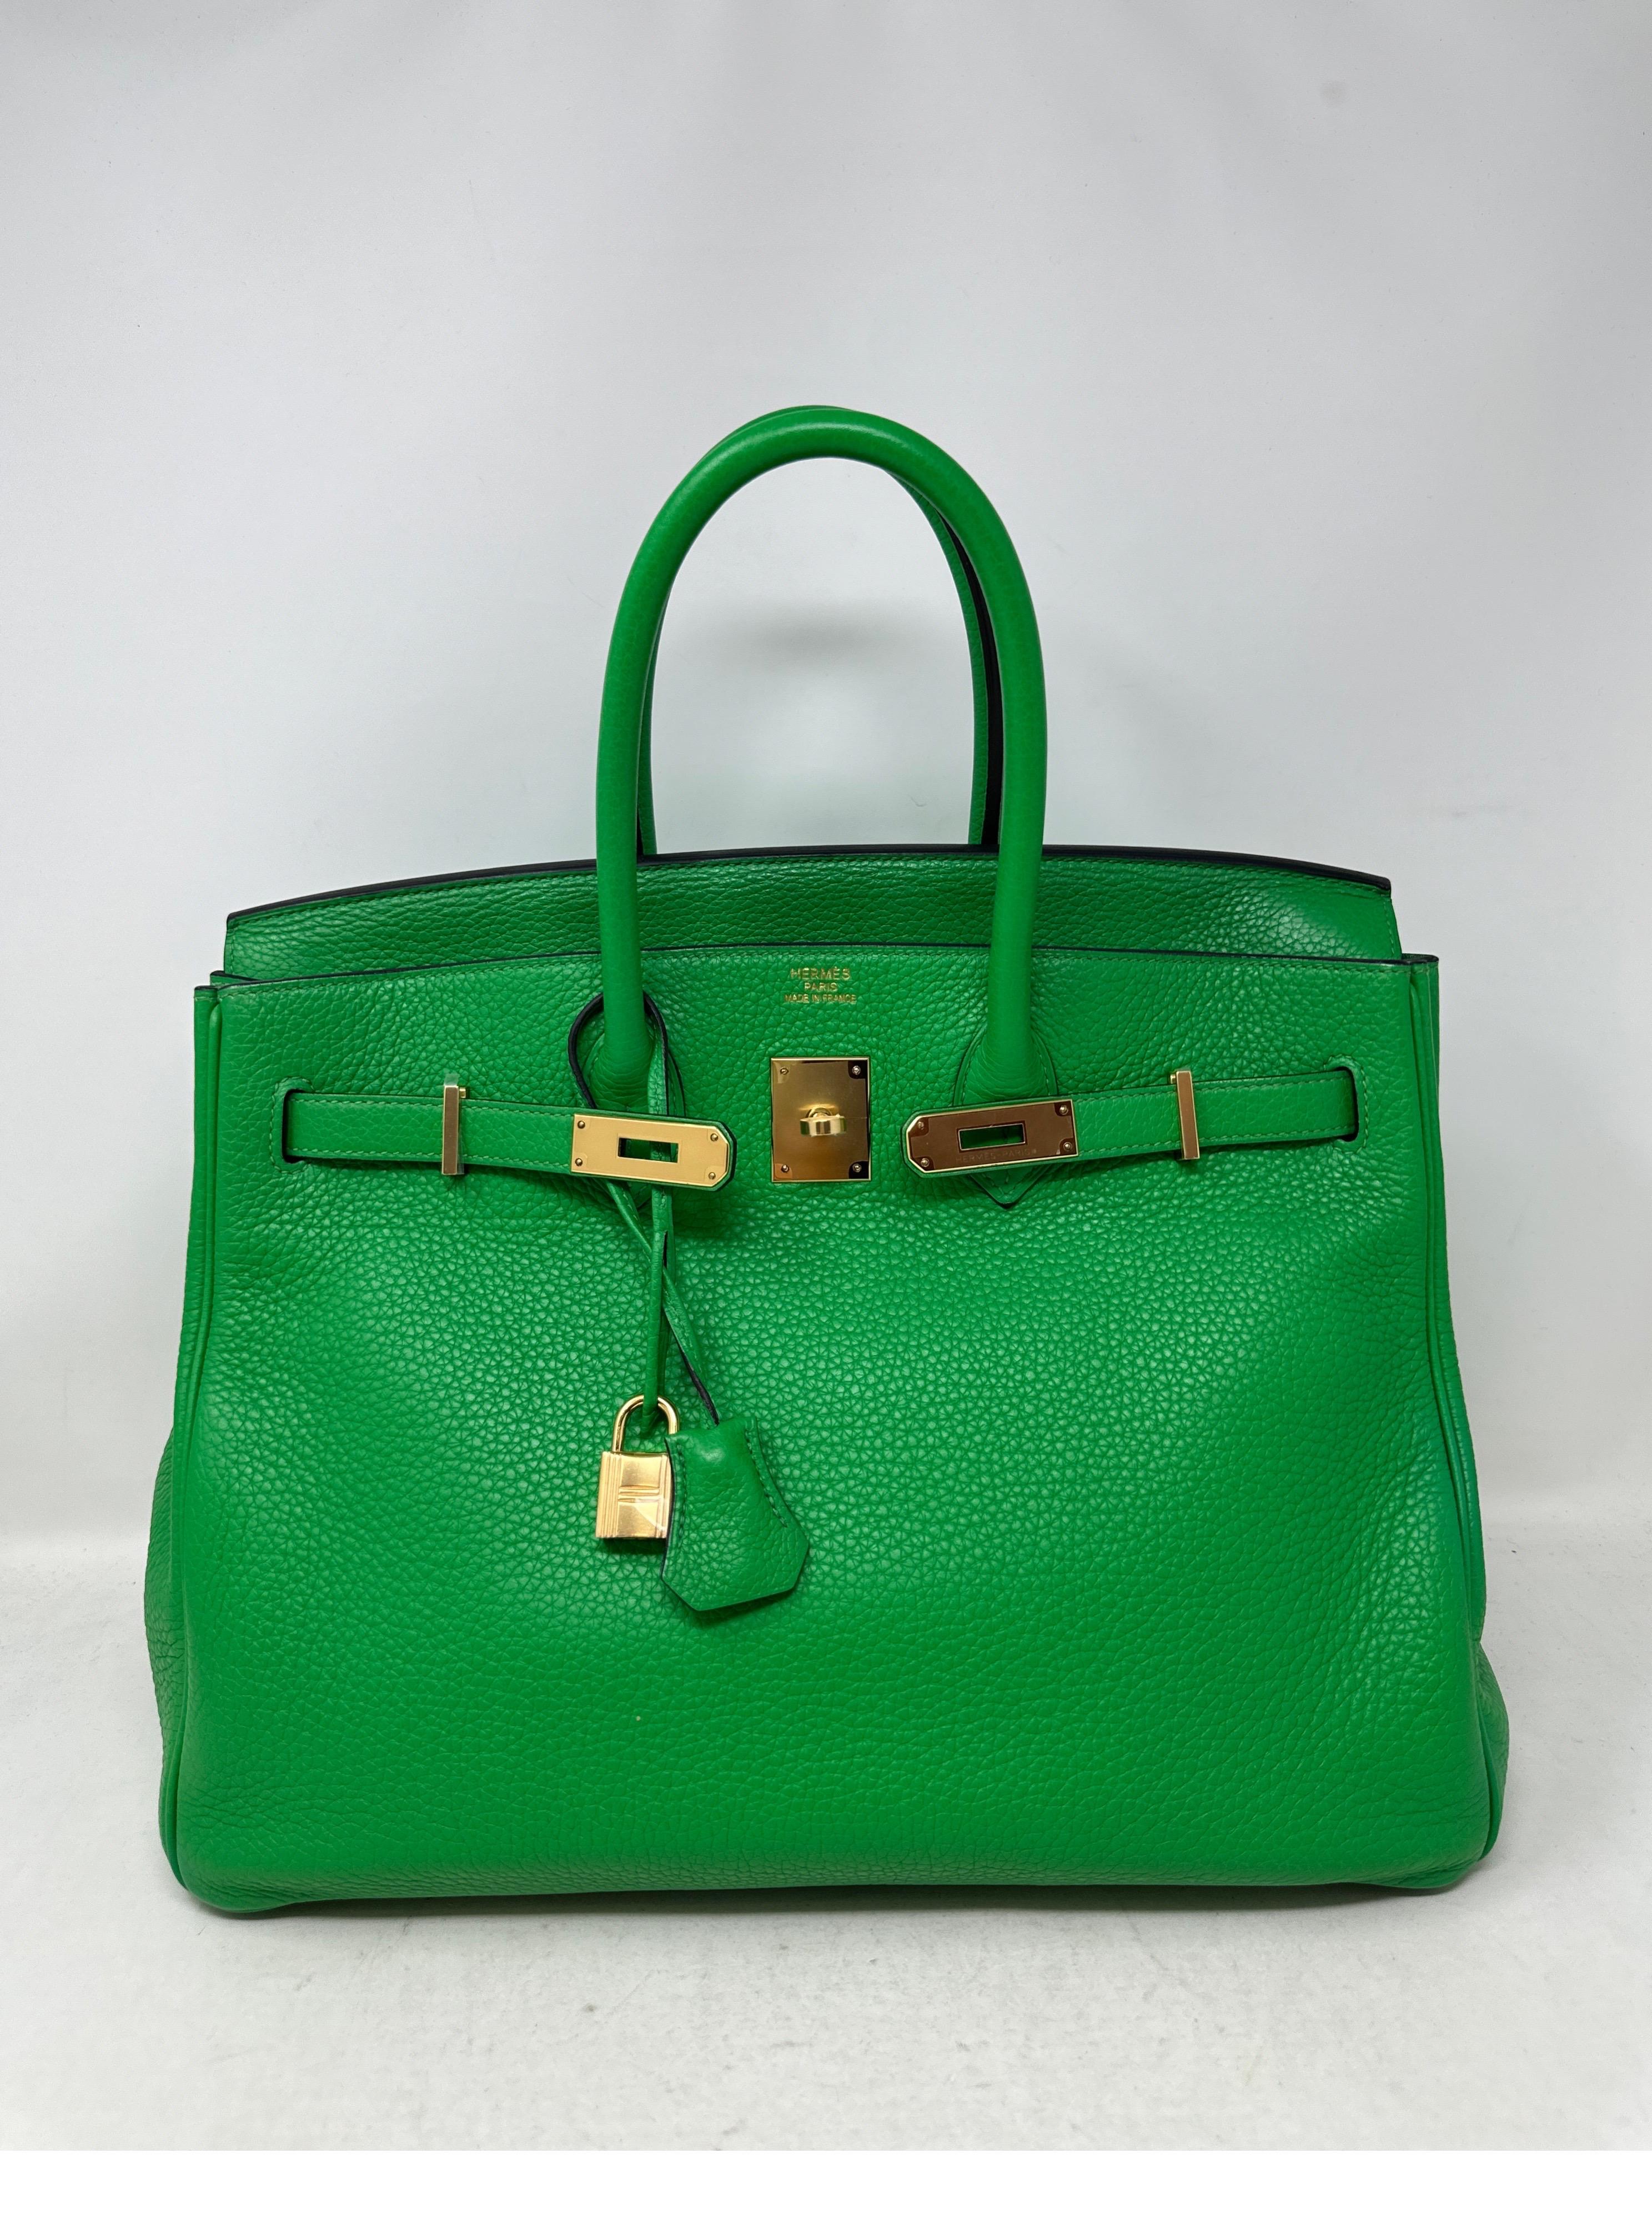 Hermes Bamboo Birkin 35 Bag. Gold hardware with clemence leather. Excellent condition. Plastic is still on hardware. The most wanted green color. Vibrant and looks like new. Interior clean. Includes clochette, lock, keys, and dust bag. Guaranteed